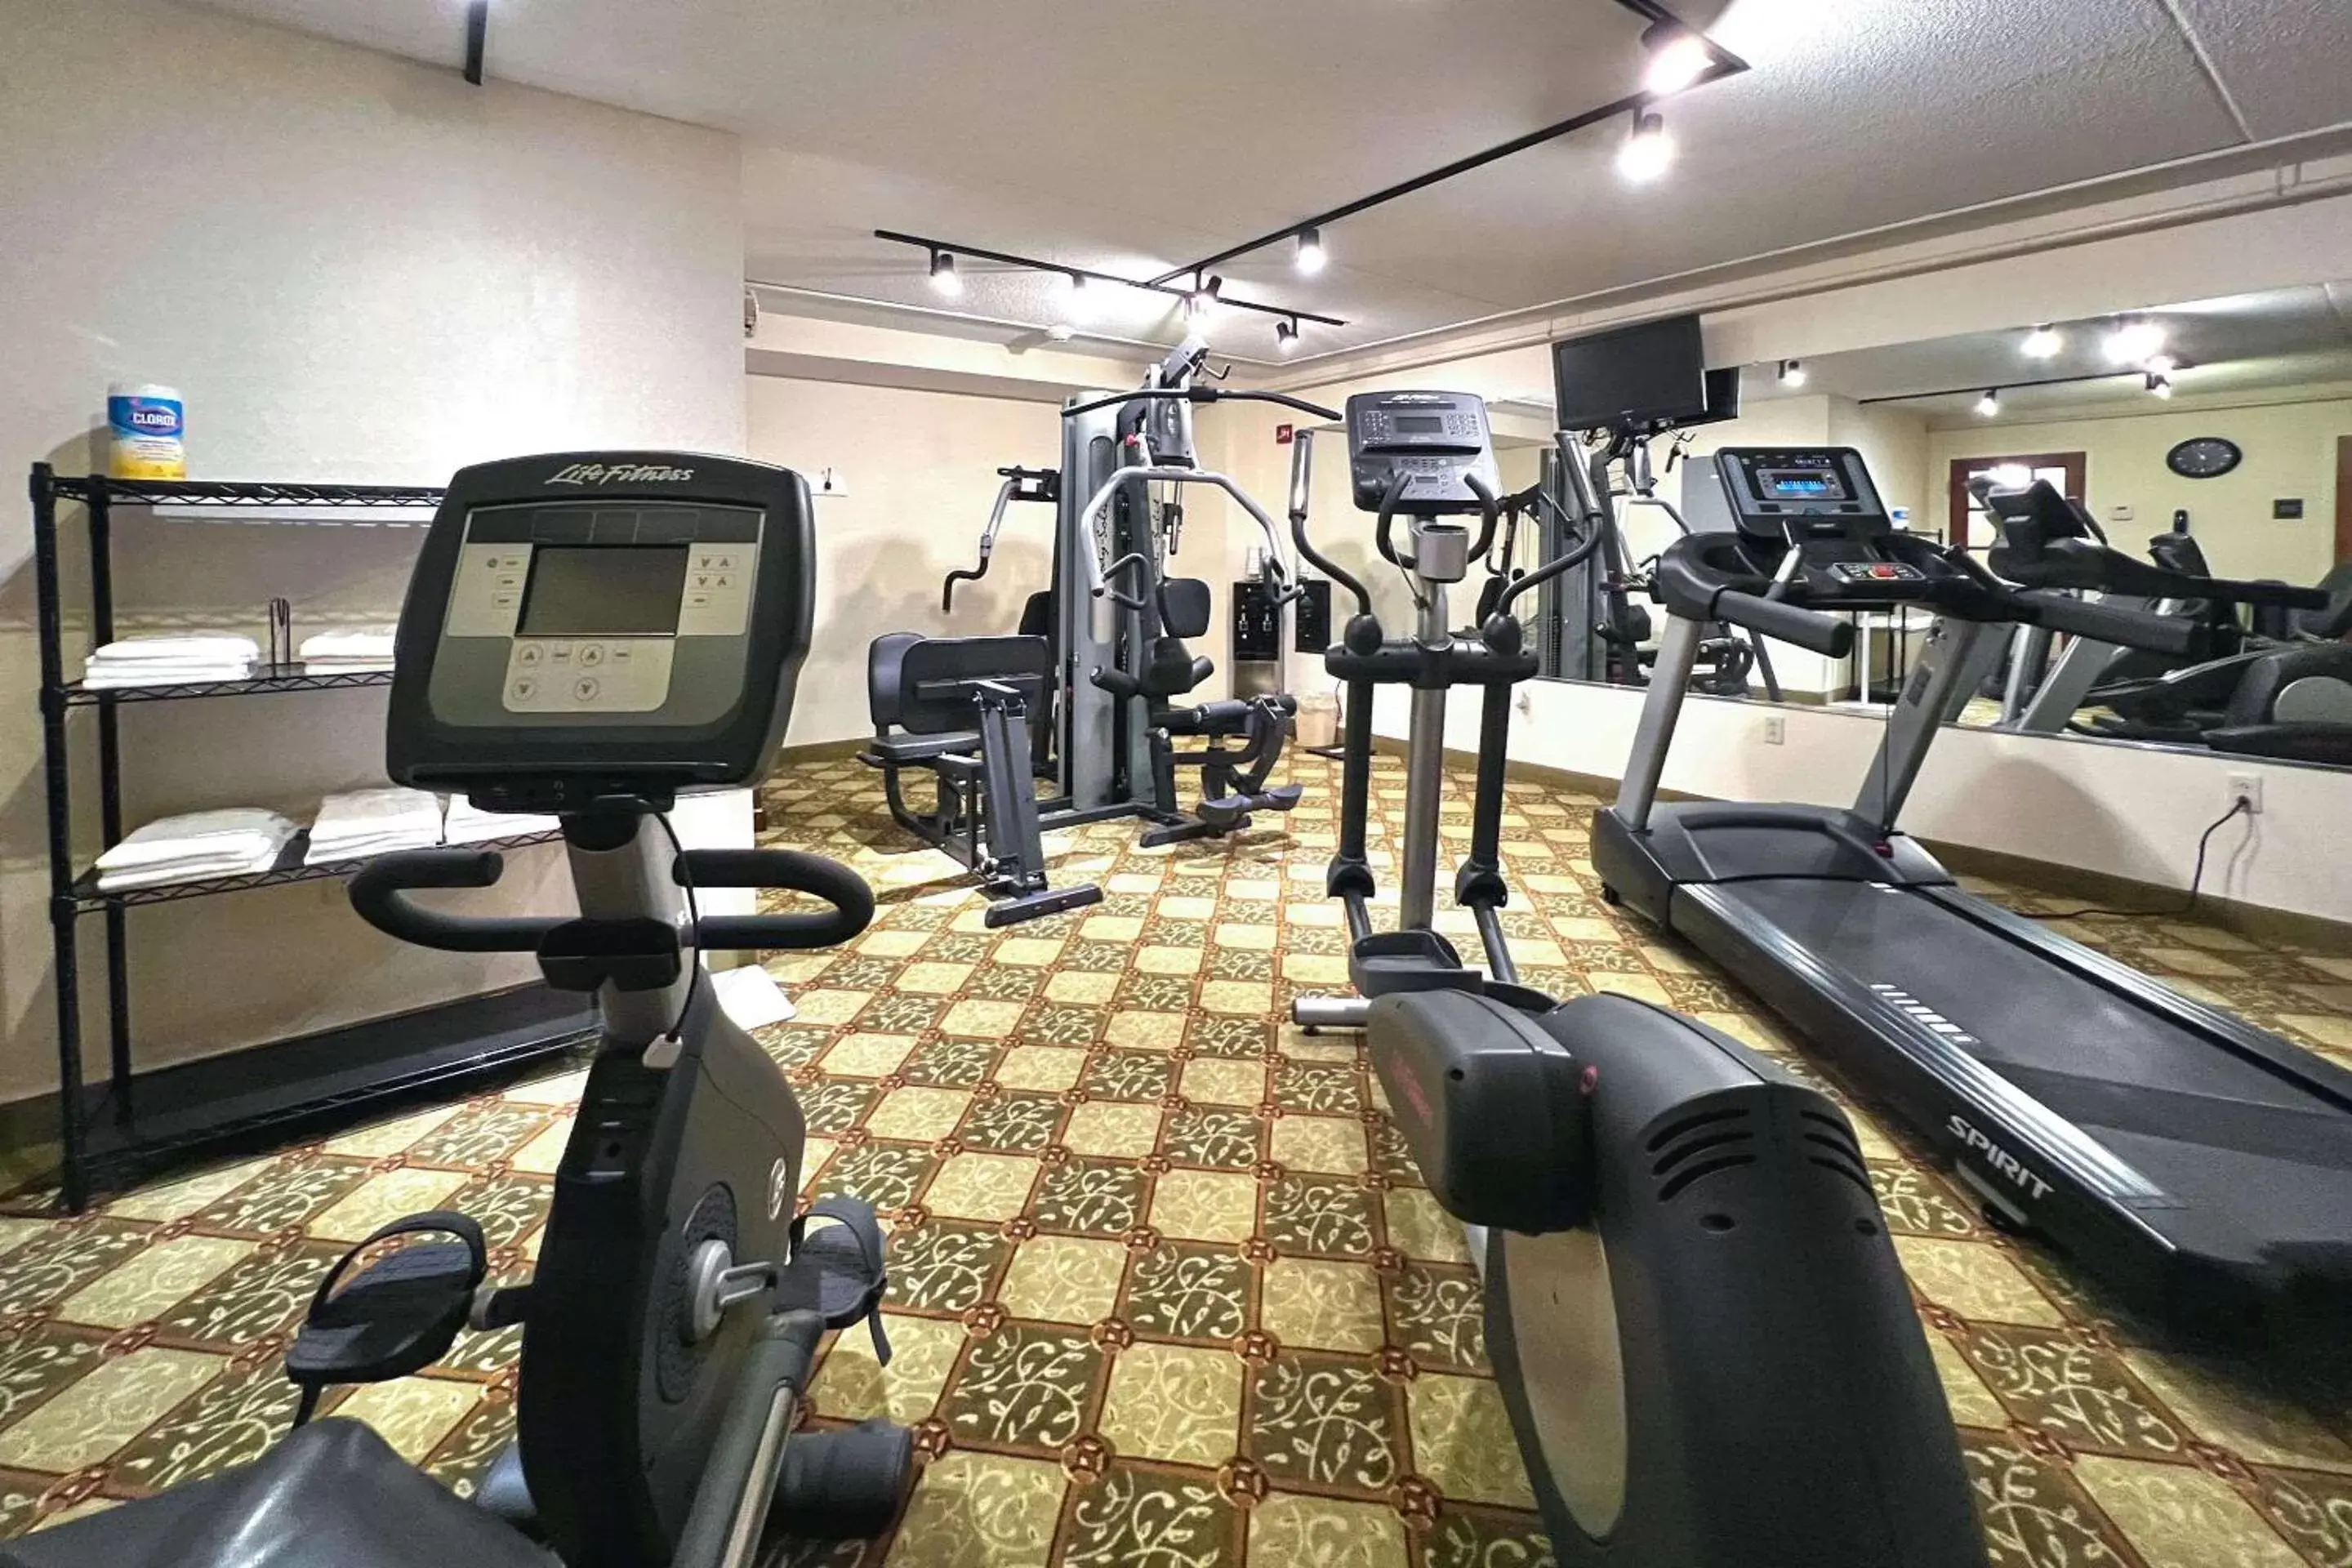 Fitness centre/facilities, Fitness Center/Facilities in Maine Evergreen Hotel, Ascend Hotel Collection